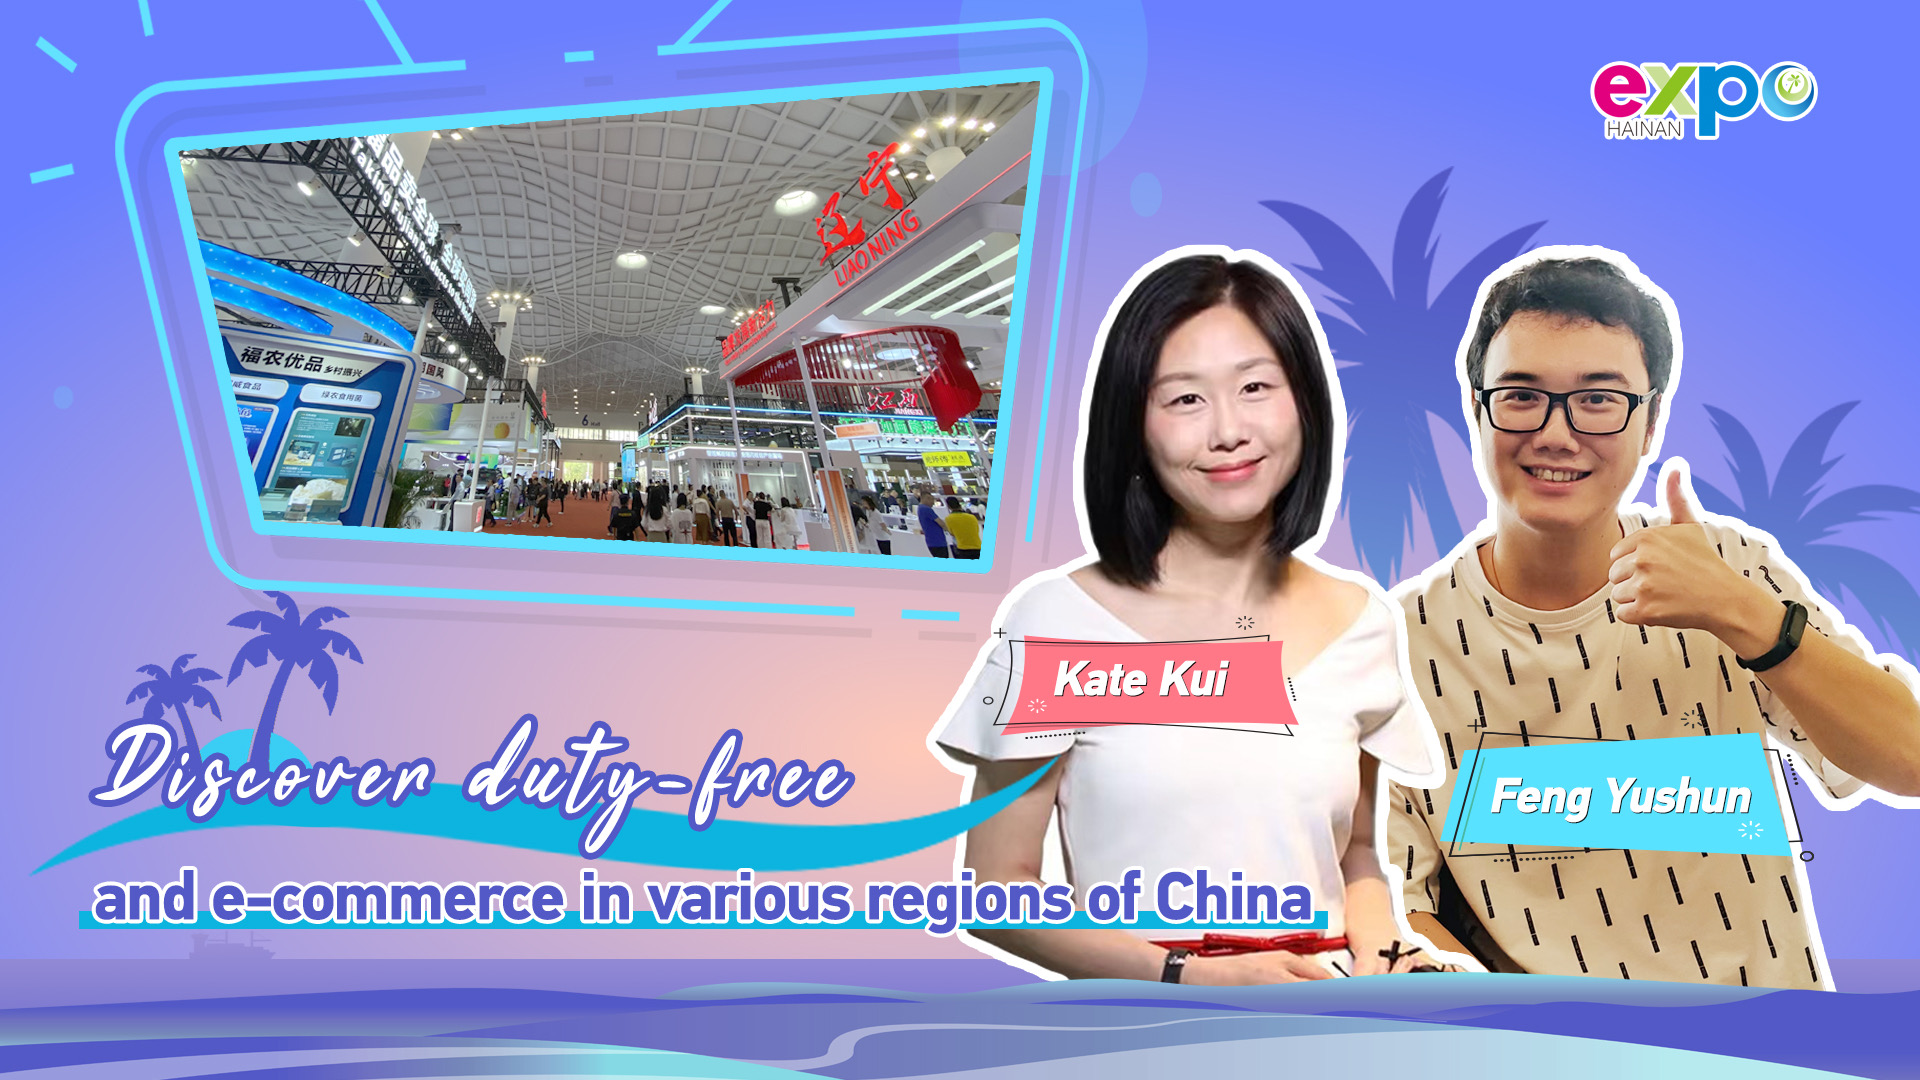 Live: Discover duty-free and e-commerce in various regions of China